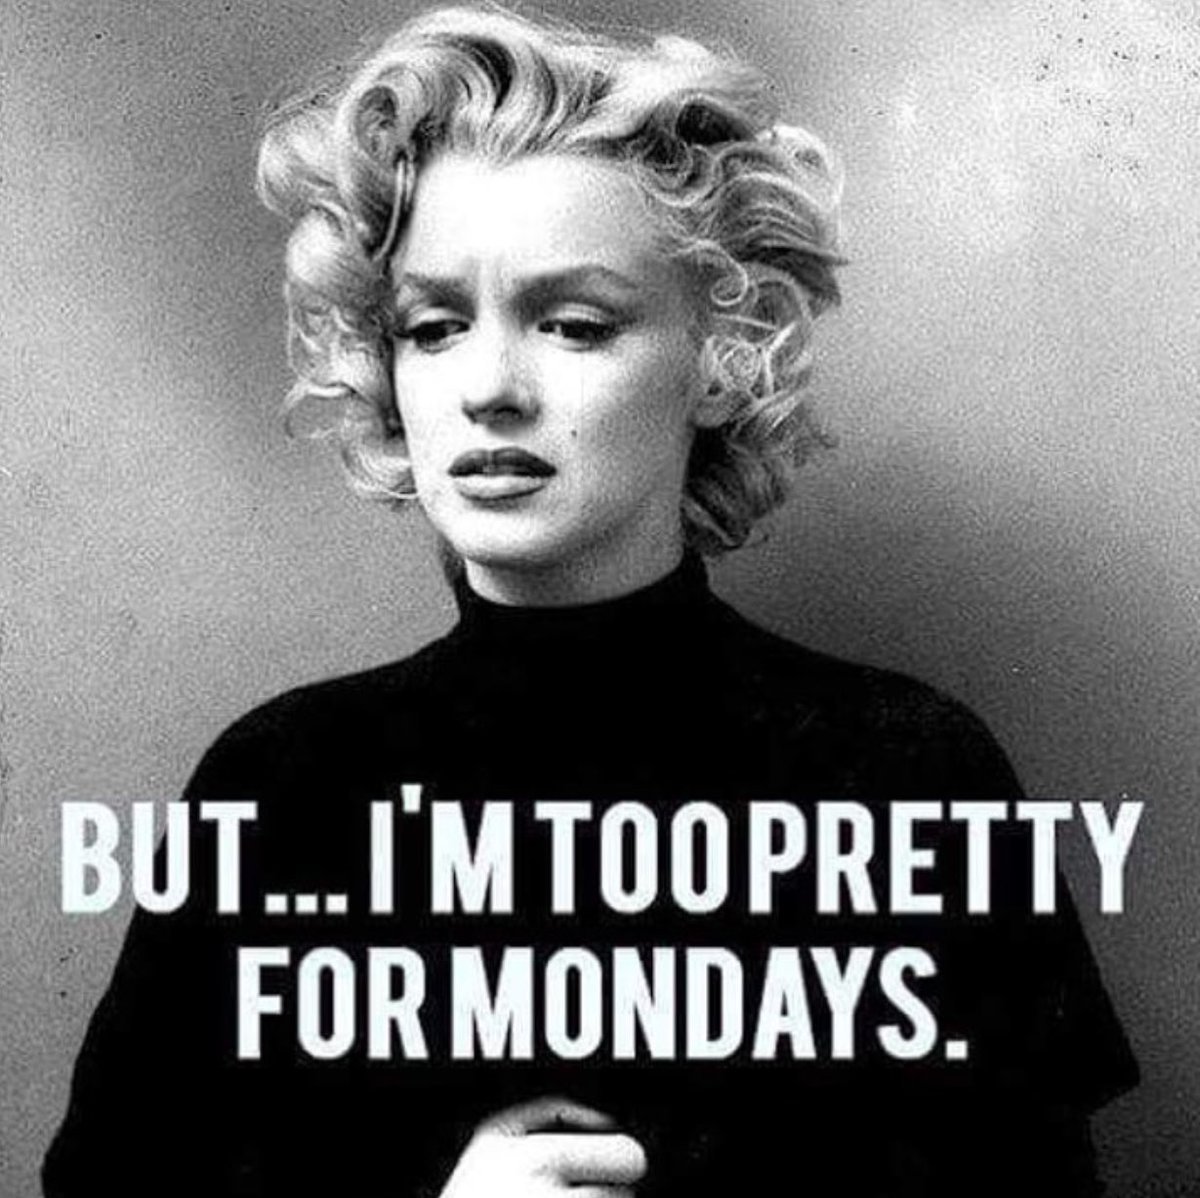 monday memes - But...I'M Toopretty For Mondays.